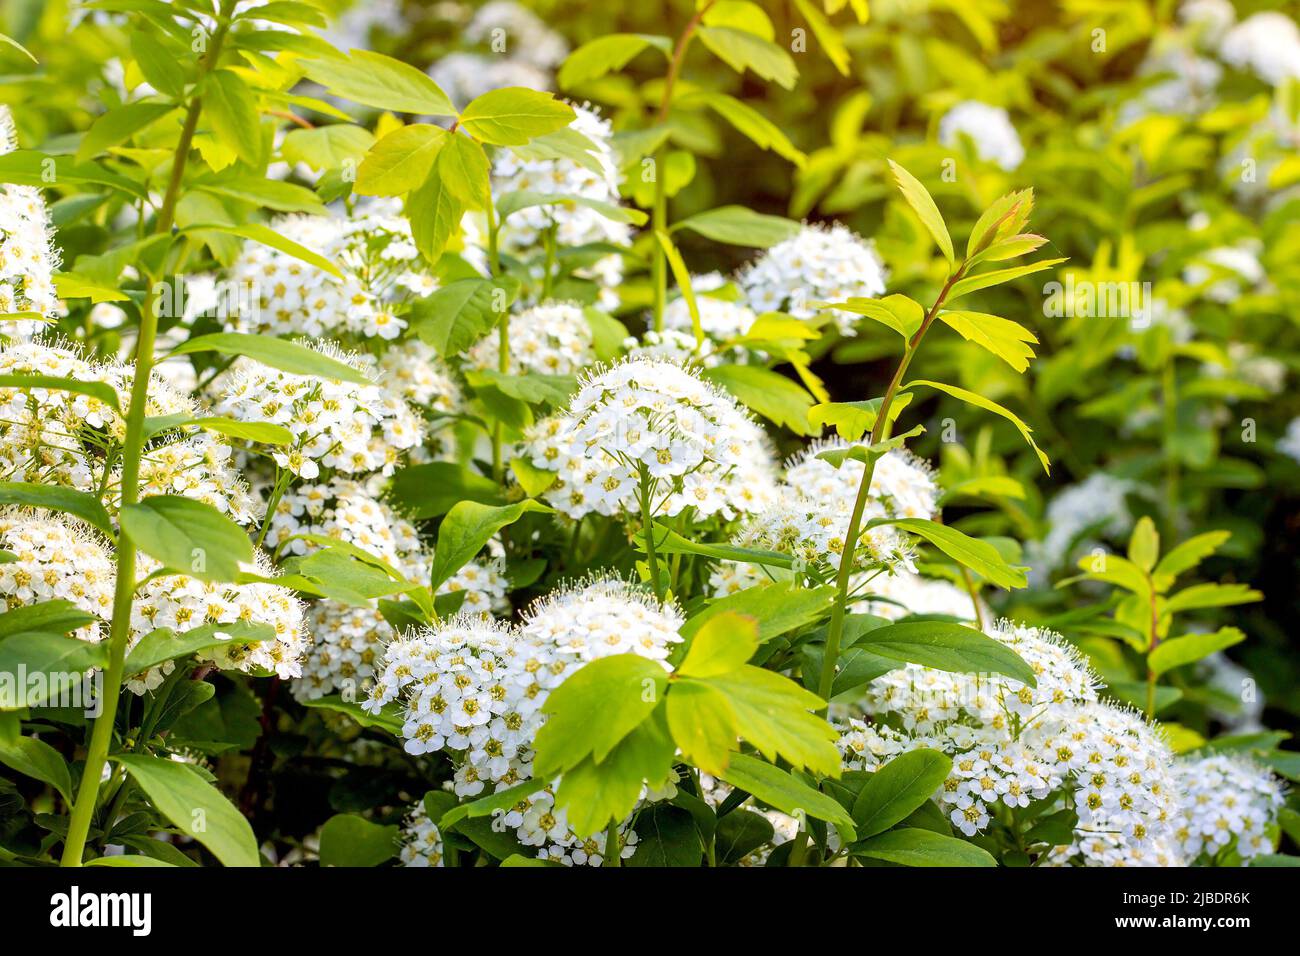 Many white Spirea (Spiraea Vanhouttei Briot Zabel Gold Fountain) flowers with green leaves in spring in the garden. Stock Photo